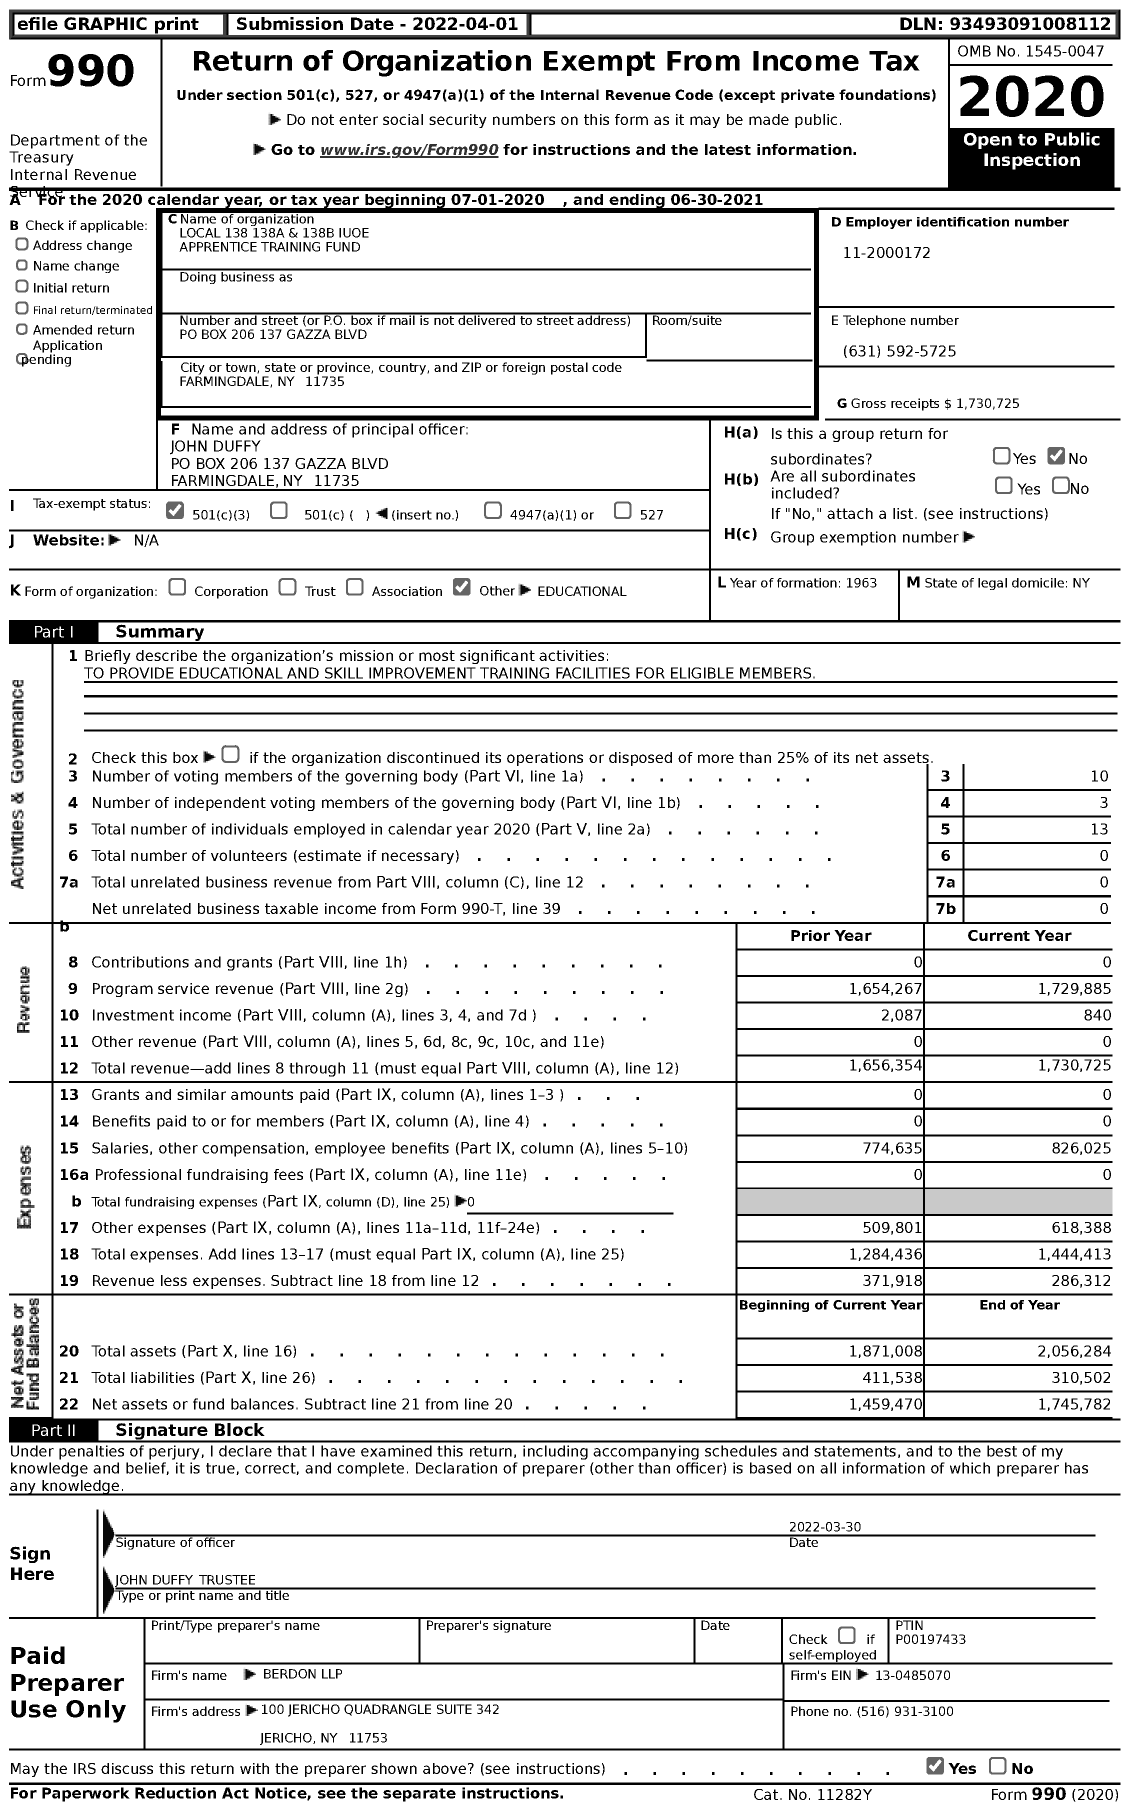 Image of first page of 2020 Form 990 for Local 138 138a and 138b Iuoe Apprentice Training Fund